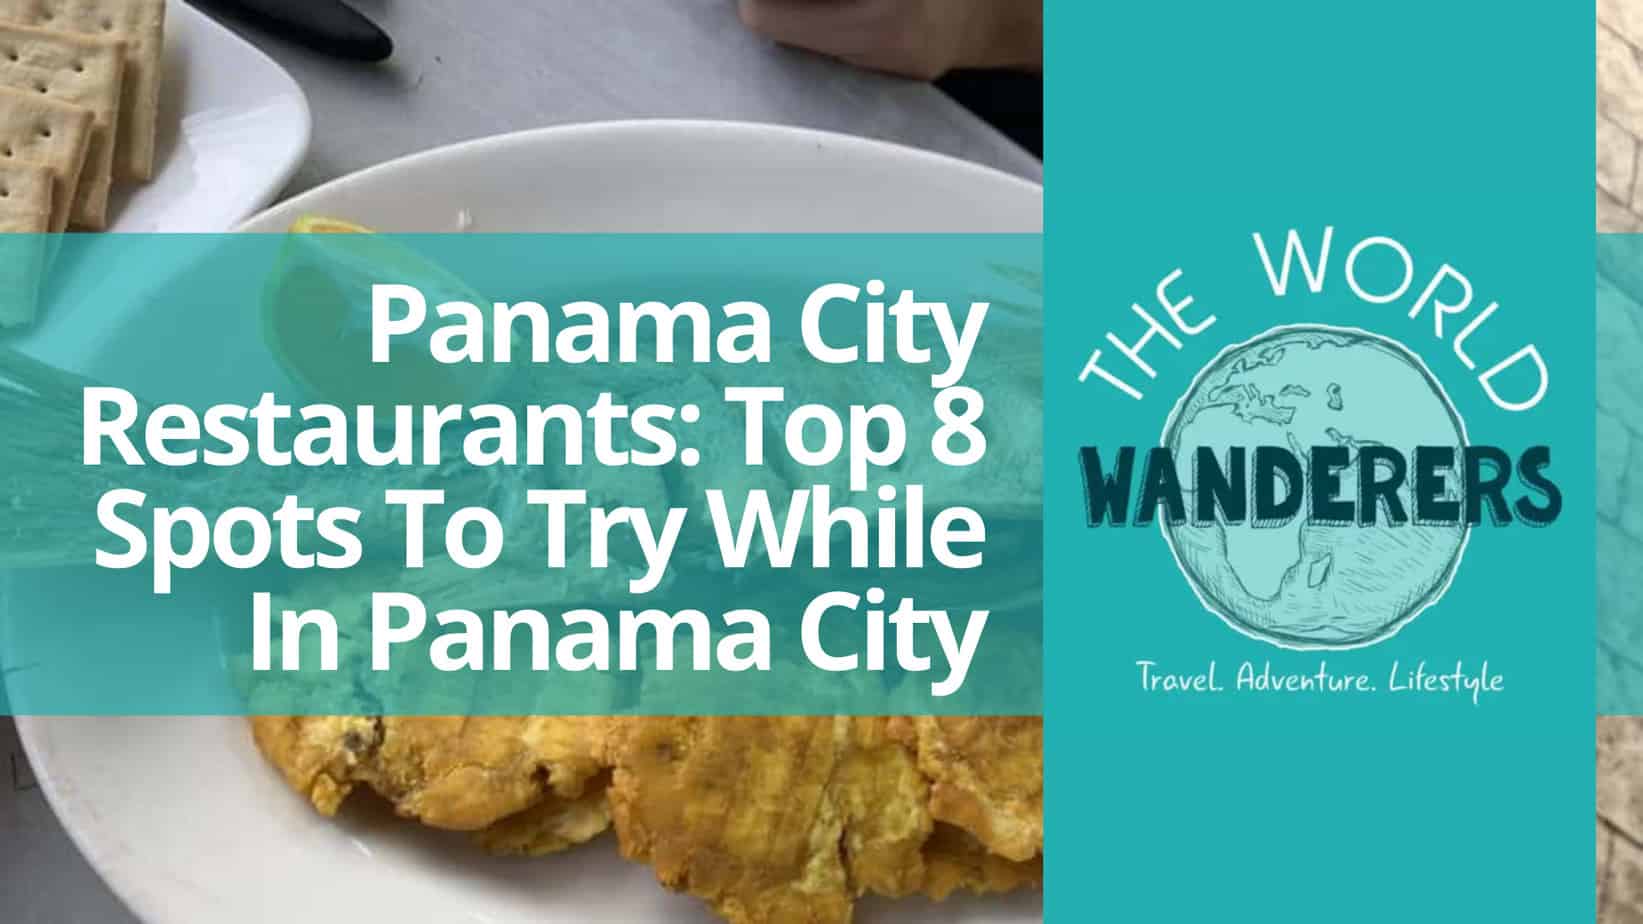 Panama City Restaurants Top 8 Spots To Try While In Panama City